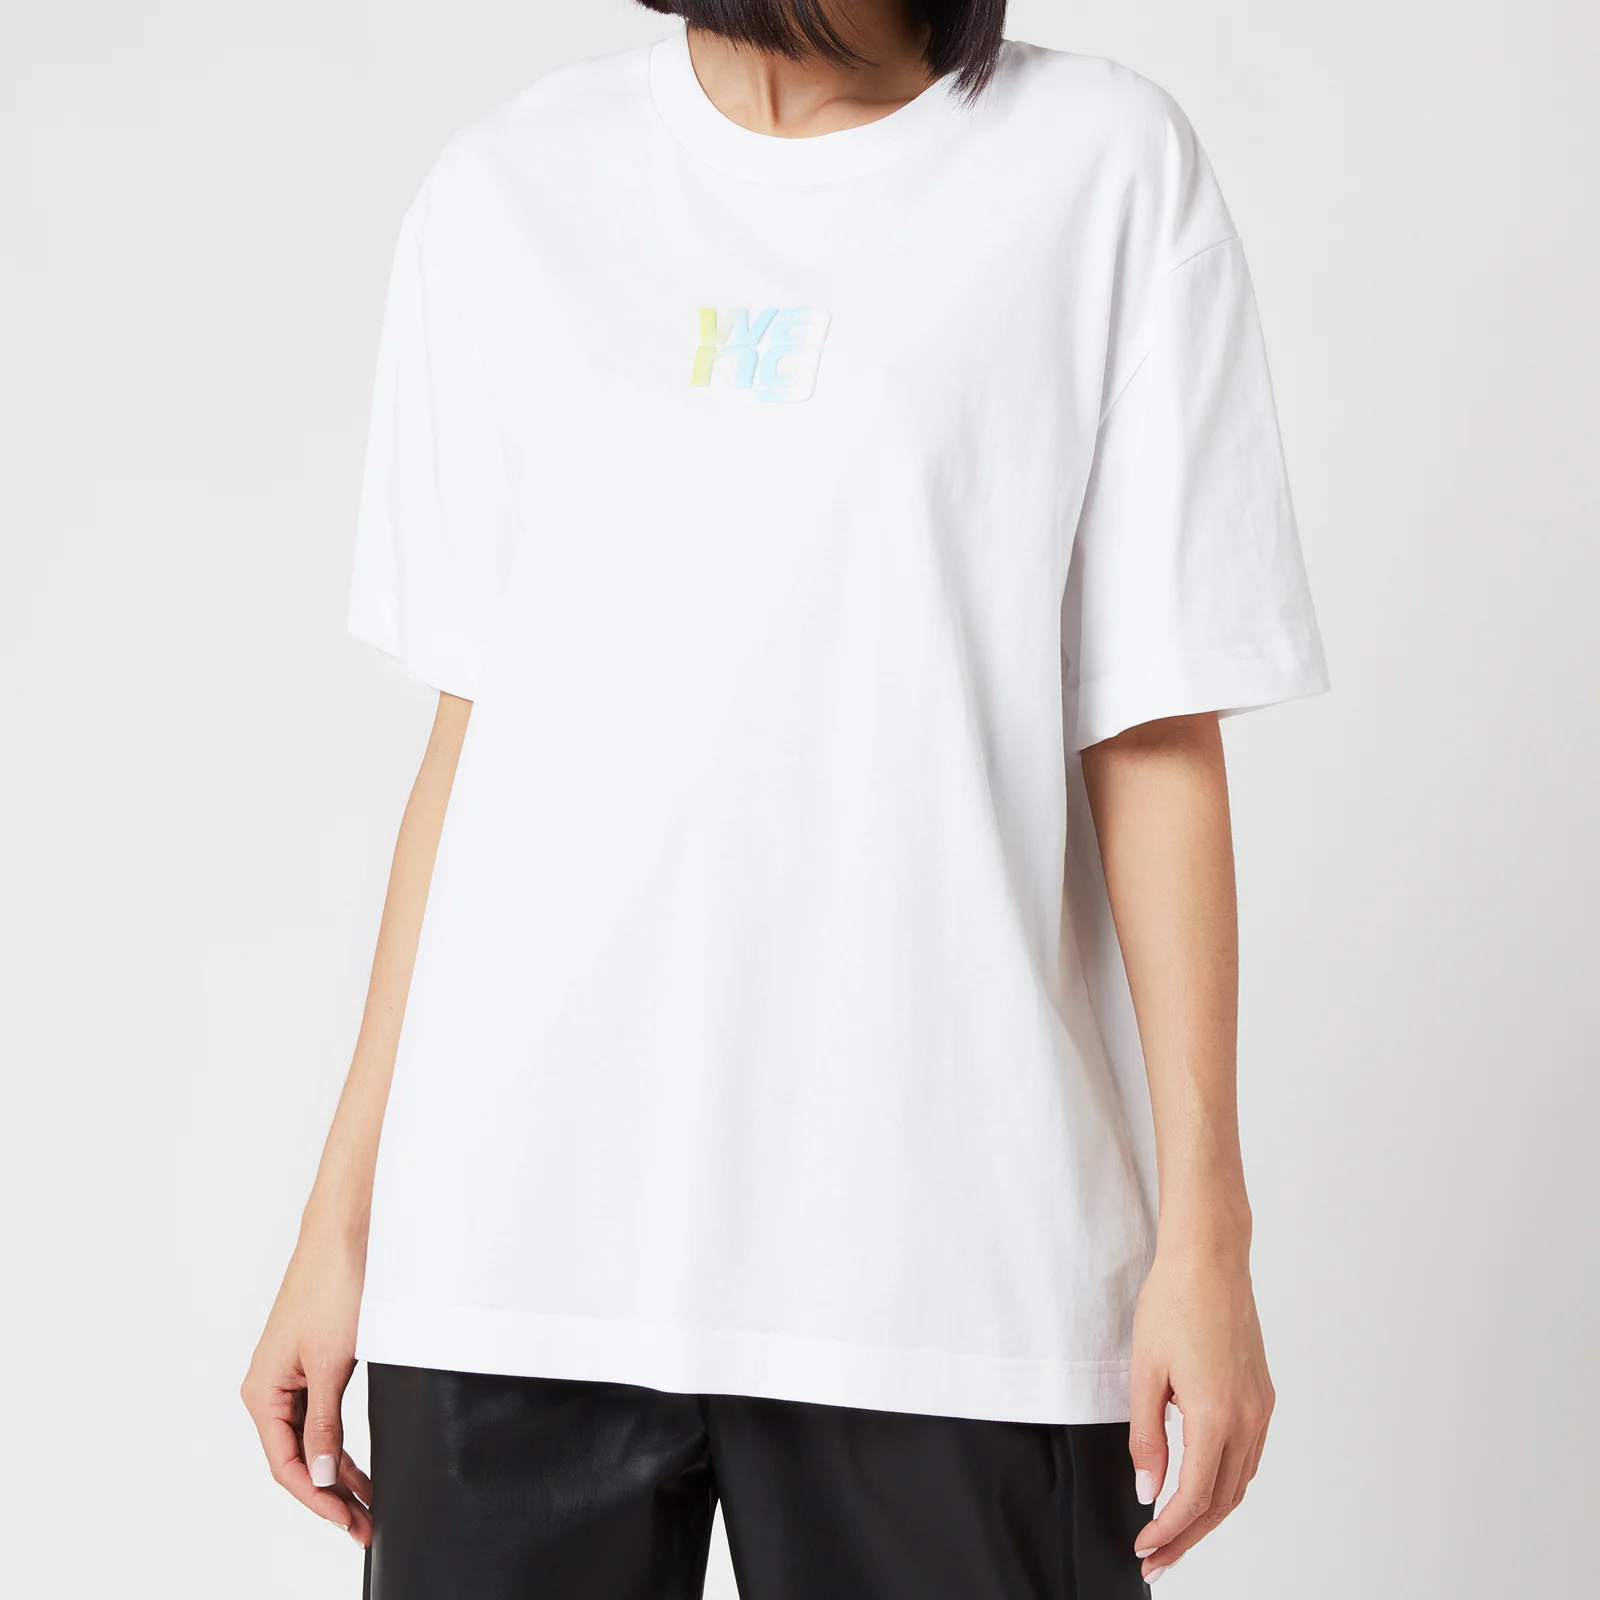 Alexander Wang Women's Short Sleeve T-Shirt with Ombre Puff Print - White Image 1